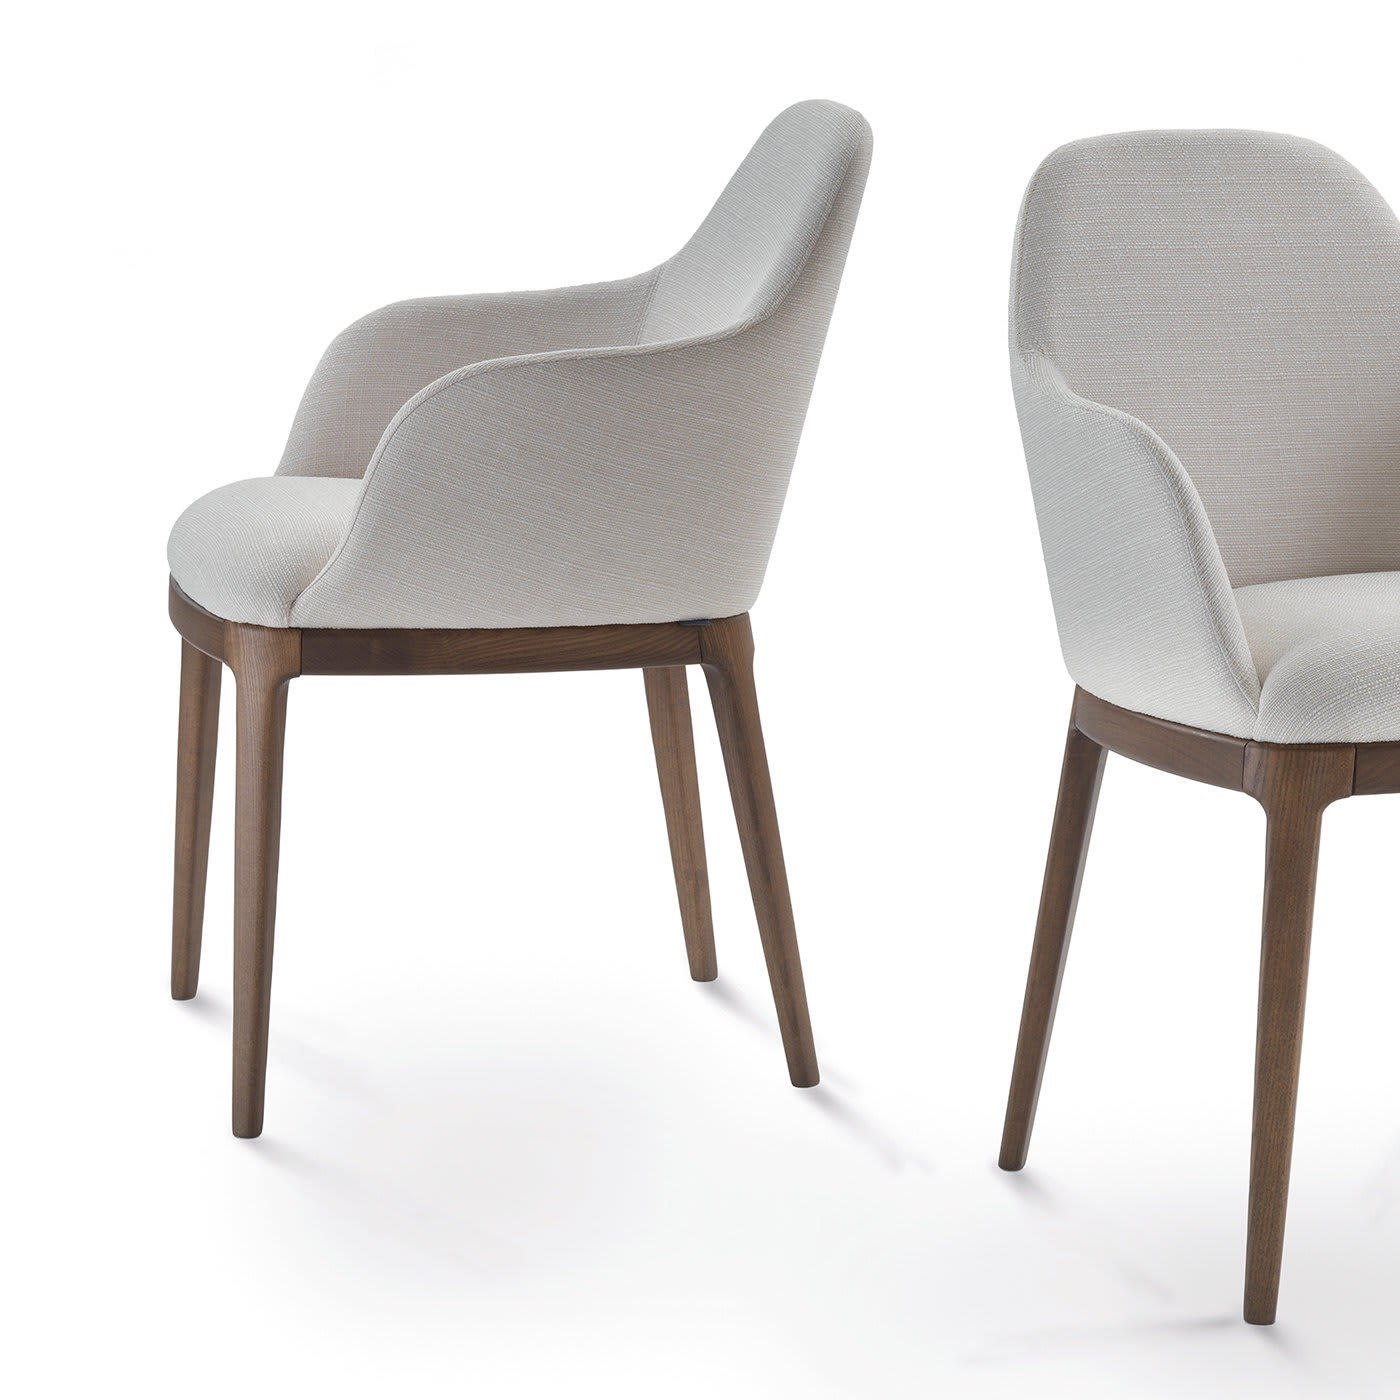 Becky Chair #2 - Pacini & Cappellini